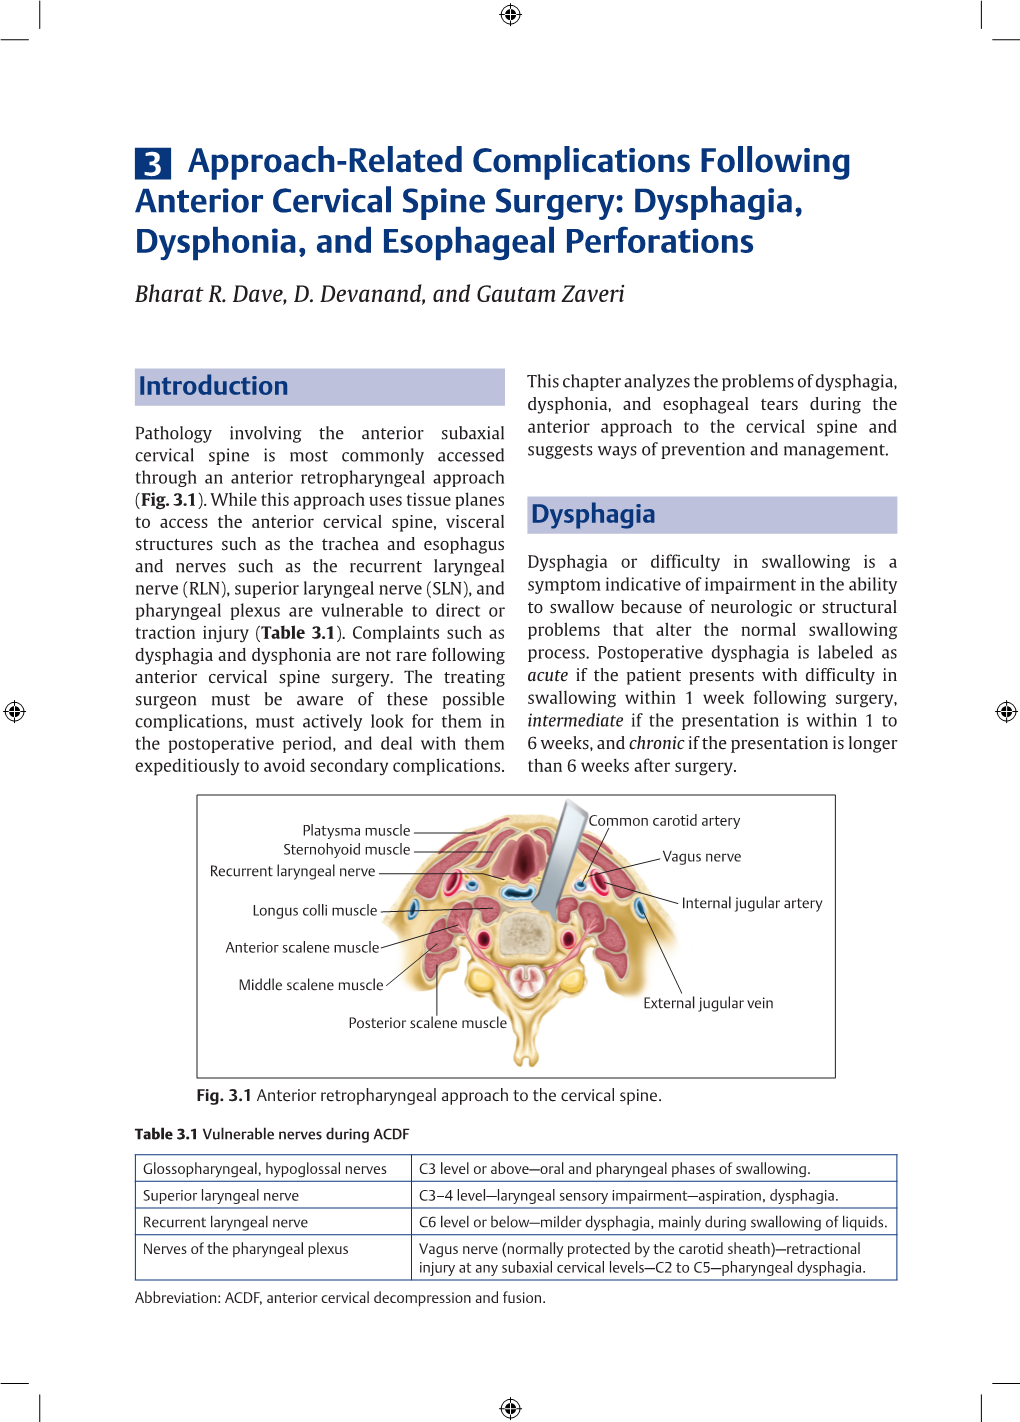 3 Approach-Related Complications Following Anterior Cervical Spine Surgery: Dysphagia, Dysphonia, and Esophageal Perforations